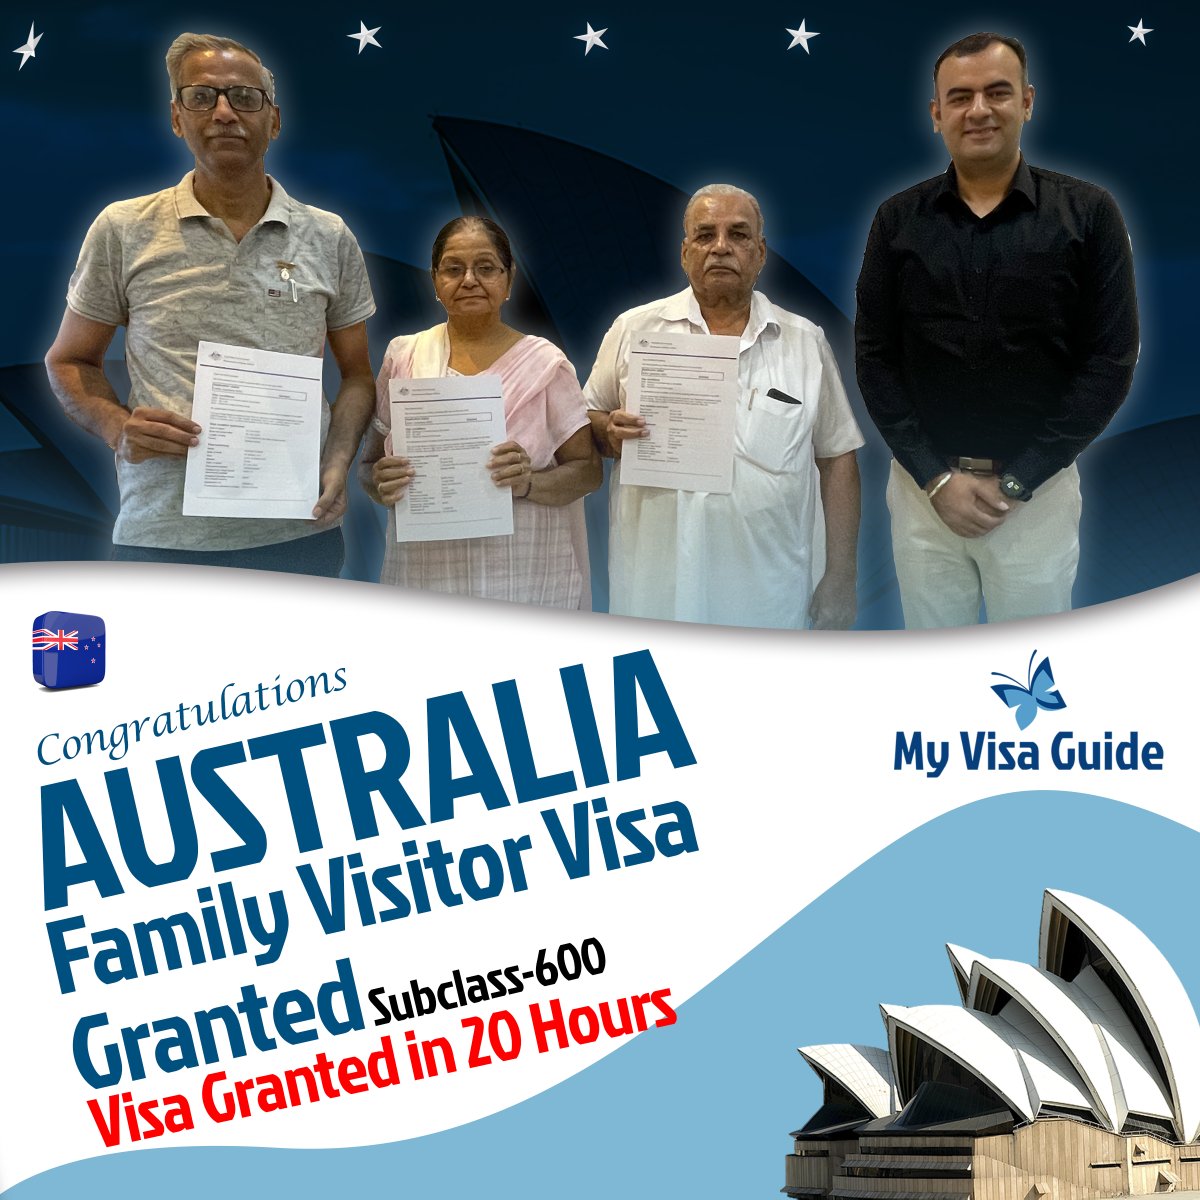 Congratulations our client for getting Australia family Visitor visa.!

Give us a call: -
+61 - 416582024
92357-00008

#visa #visasubclass190 #subclass #registeredmaraagent #melbournemigrationagent #migrationagent #migrationaustralia #bestmigrationagent #studyinaustralia